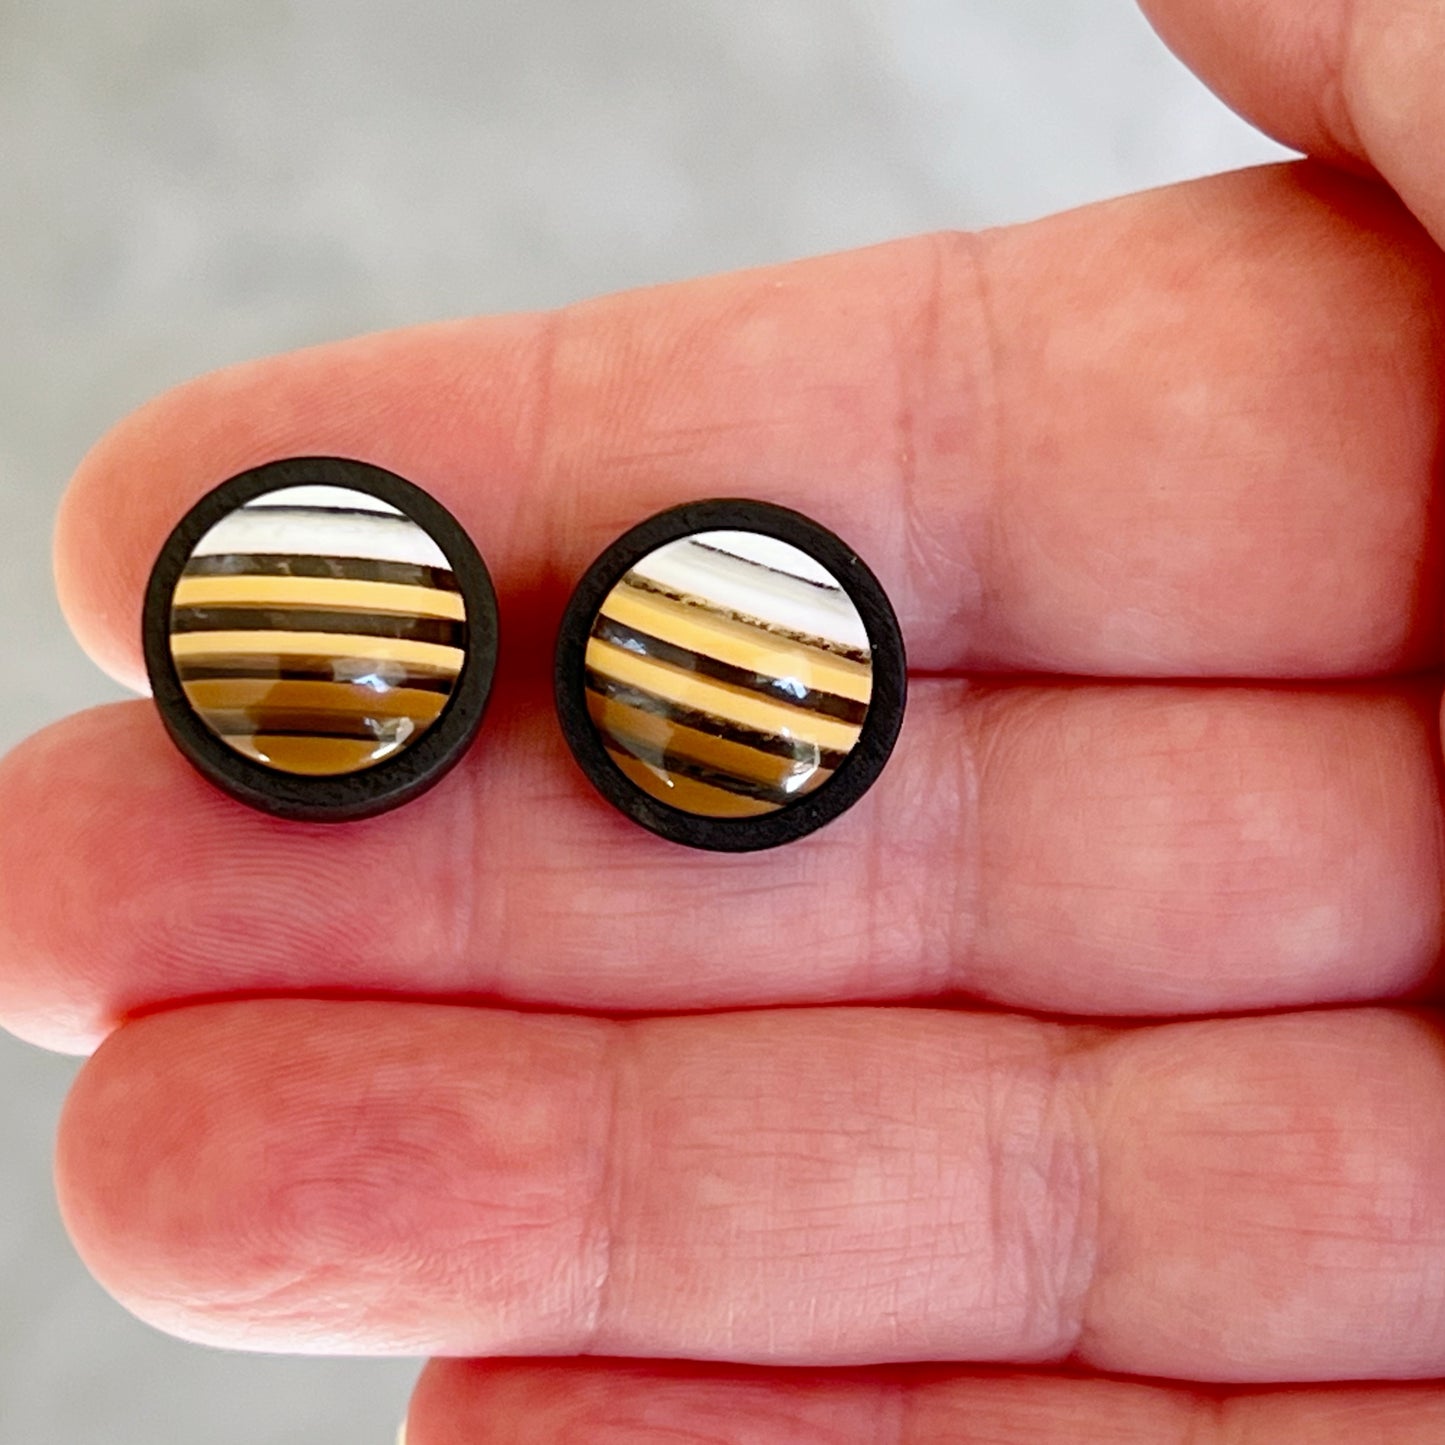 Brown & White Striped Black Wood Earrings - Chic & Contemporary Accessories